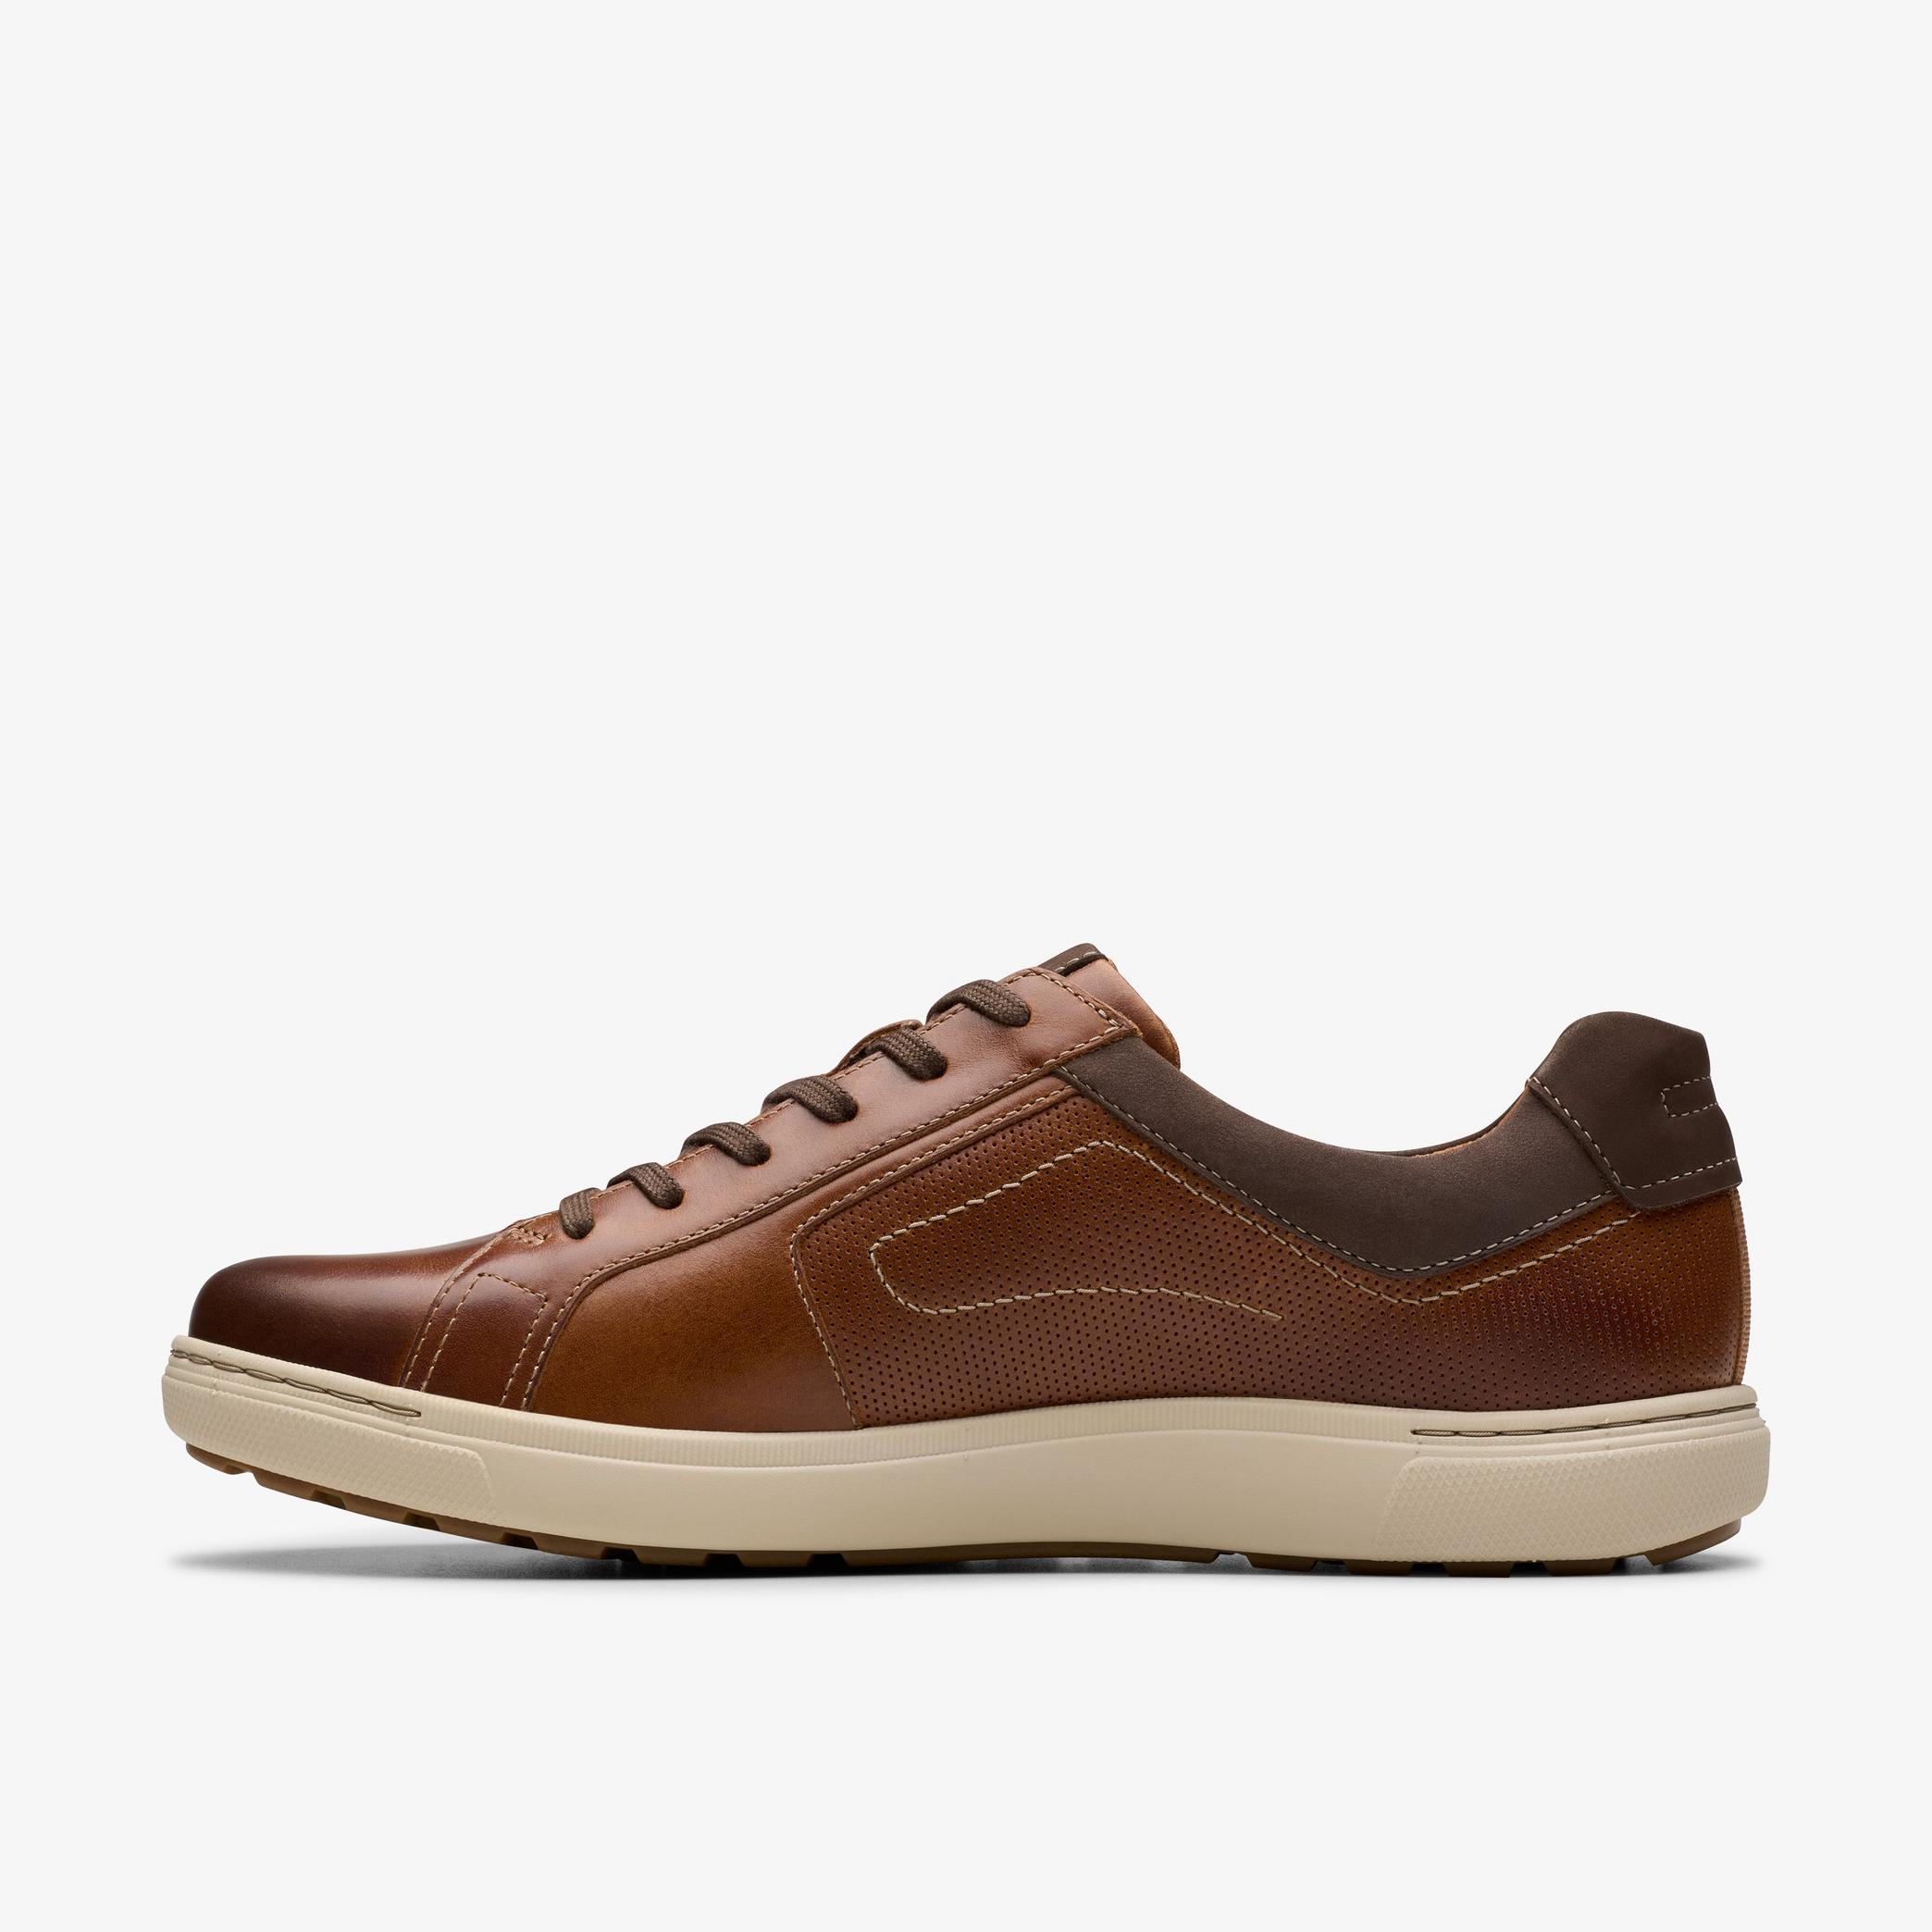 MENS Mapstone Lace Tan Leather Sneakers | Clarks US